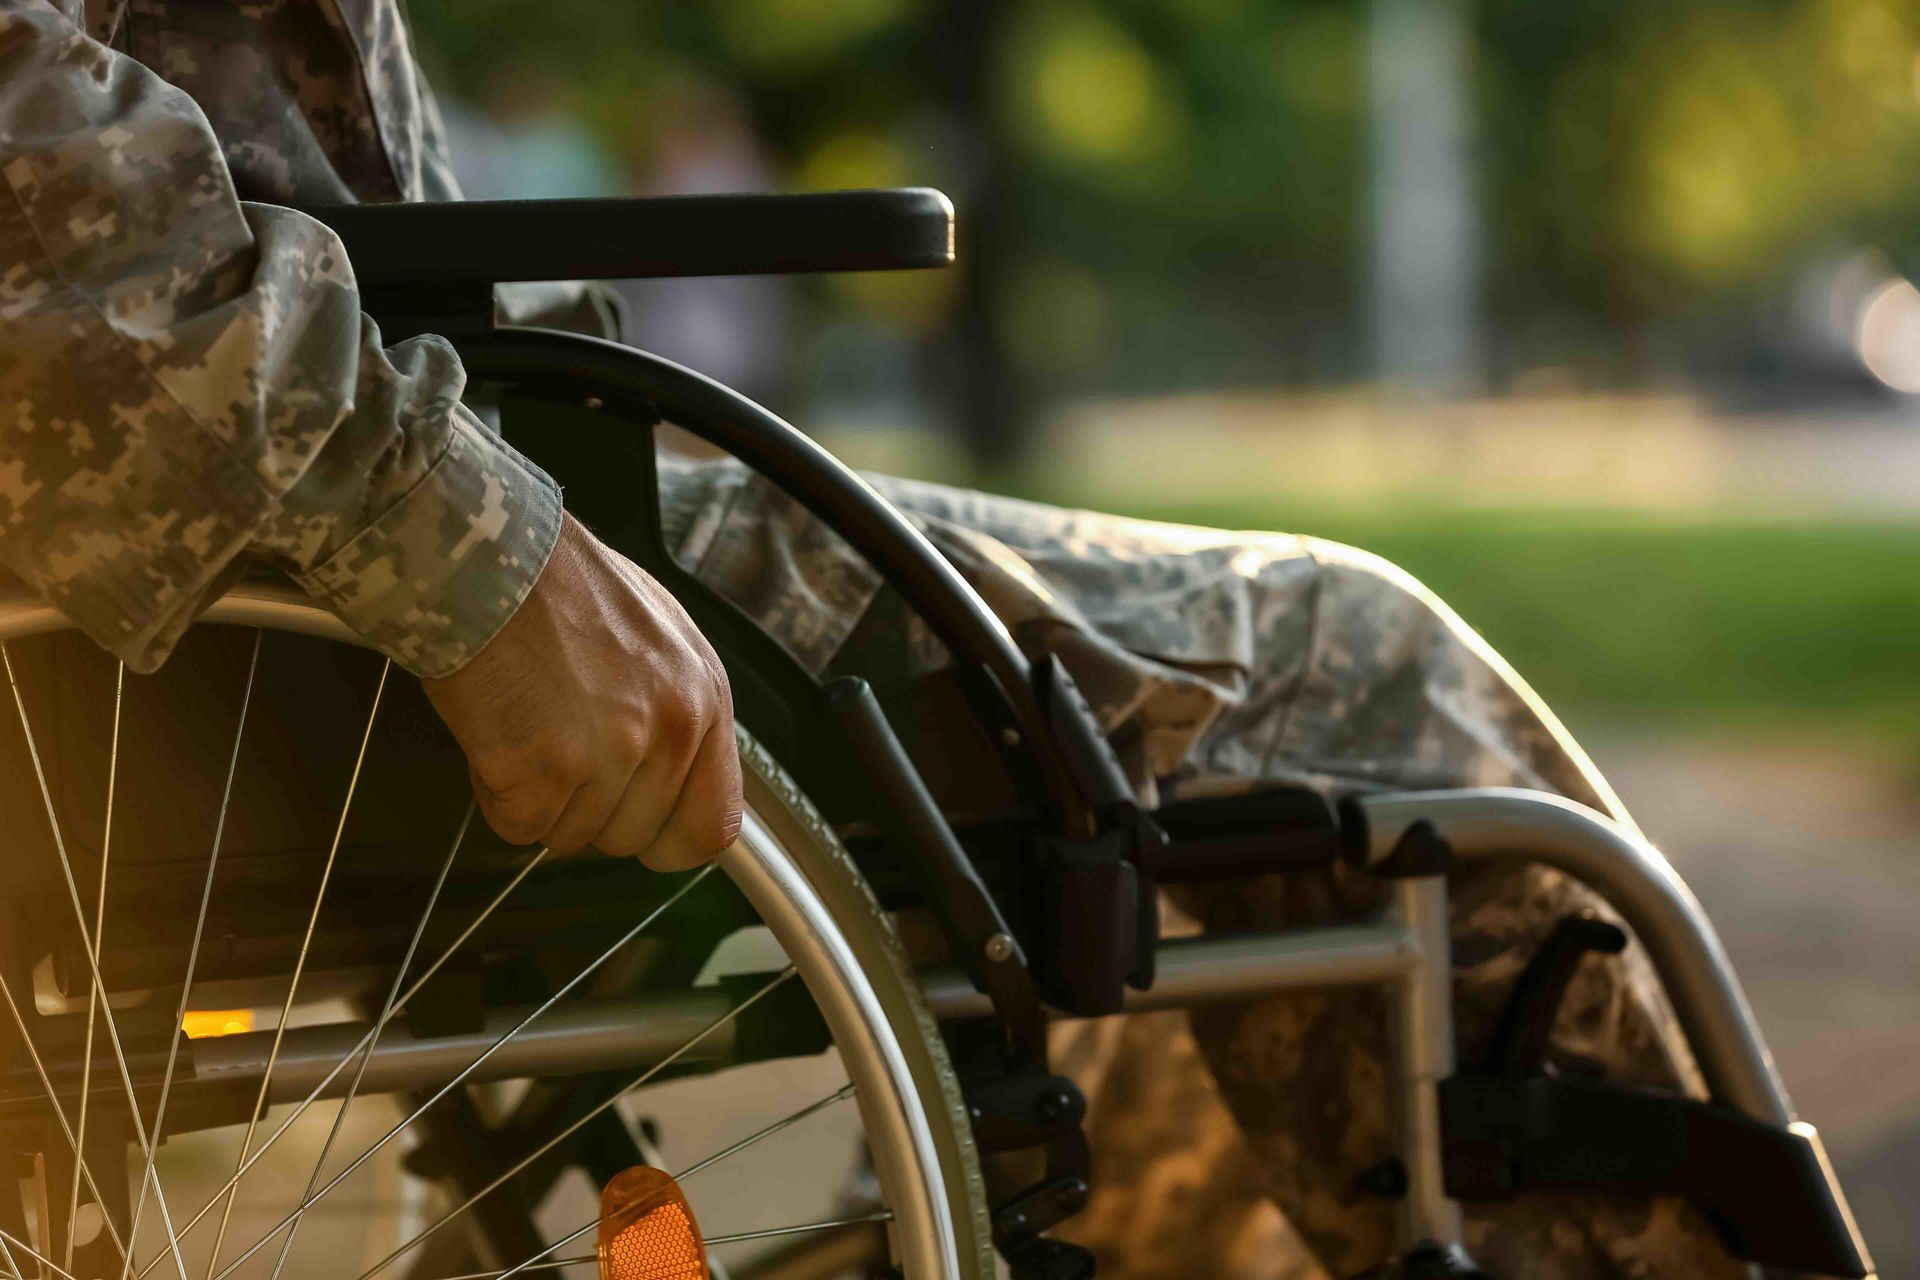 A soldier is sitting in a wheelchair in a park.